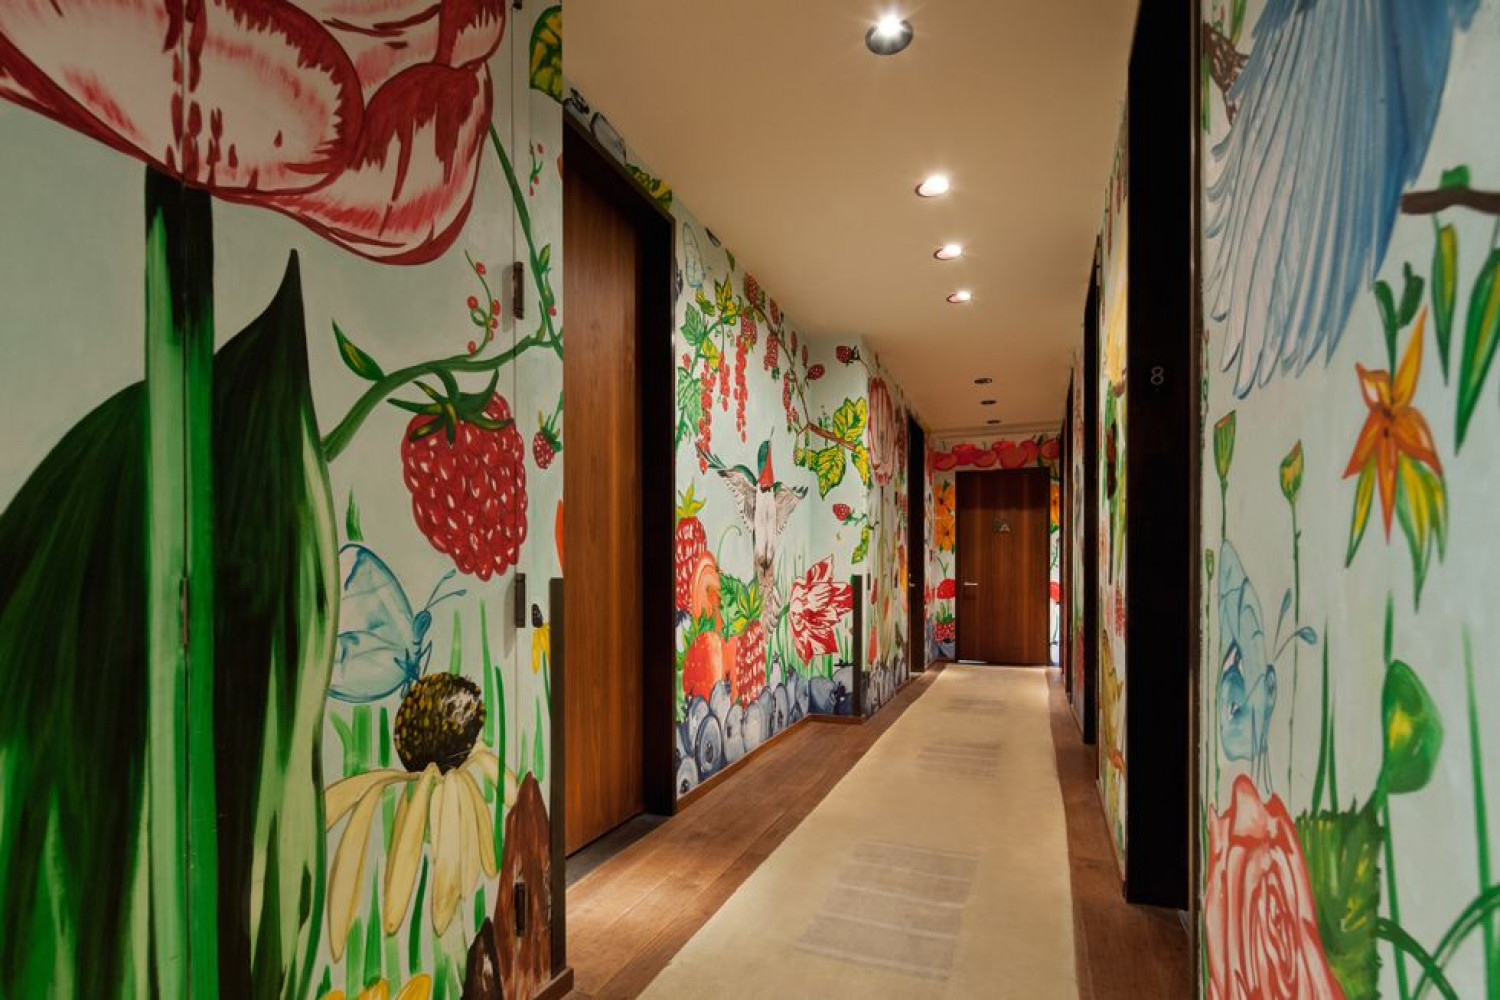 Every floor of Manhattan's Chambers Hotel is marked by a specific installation with work by artists such as Sheila Pepe, John Waters, and Bob and Roberta Smith